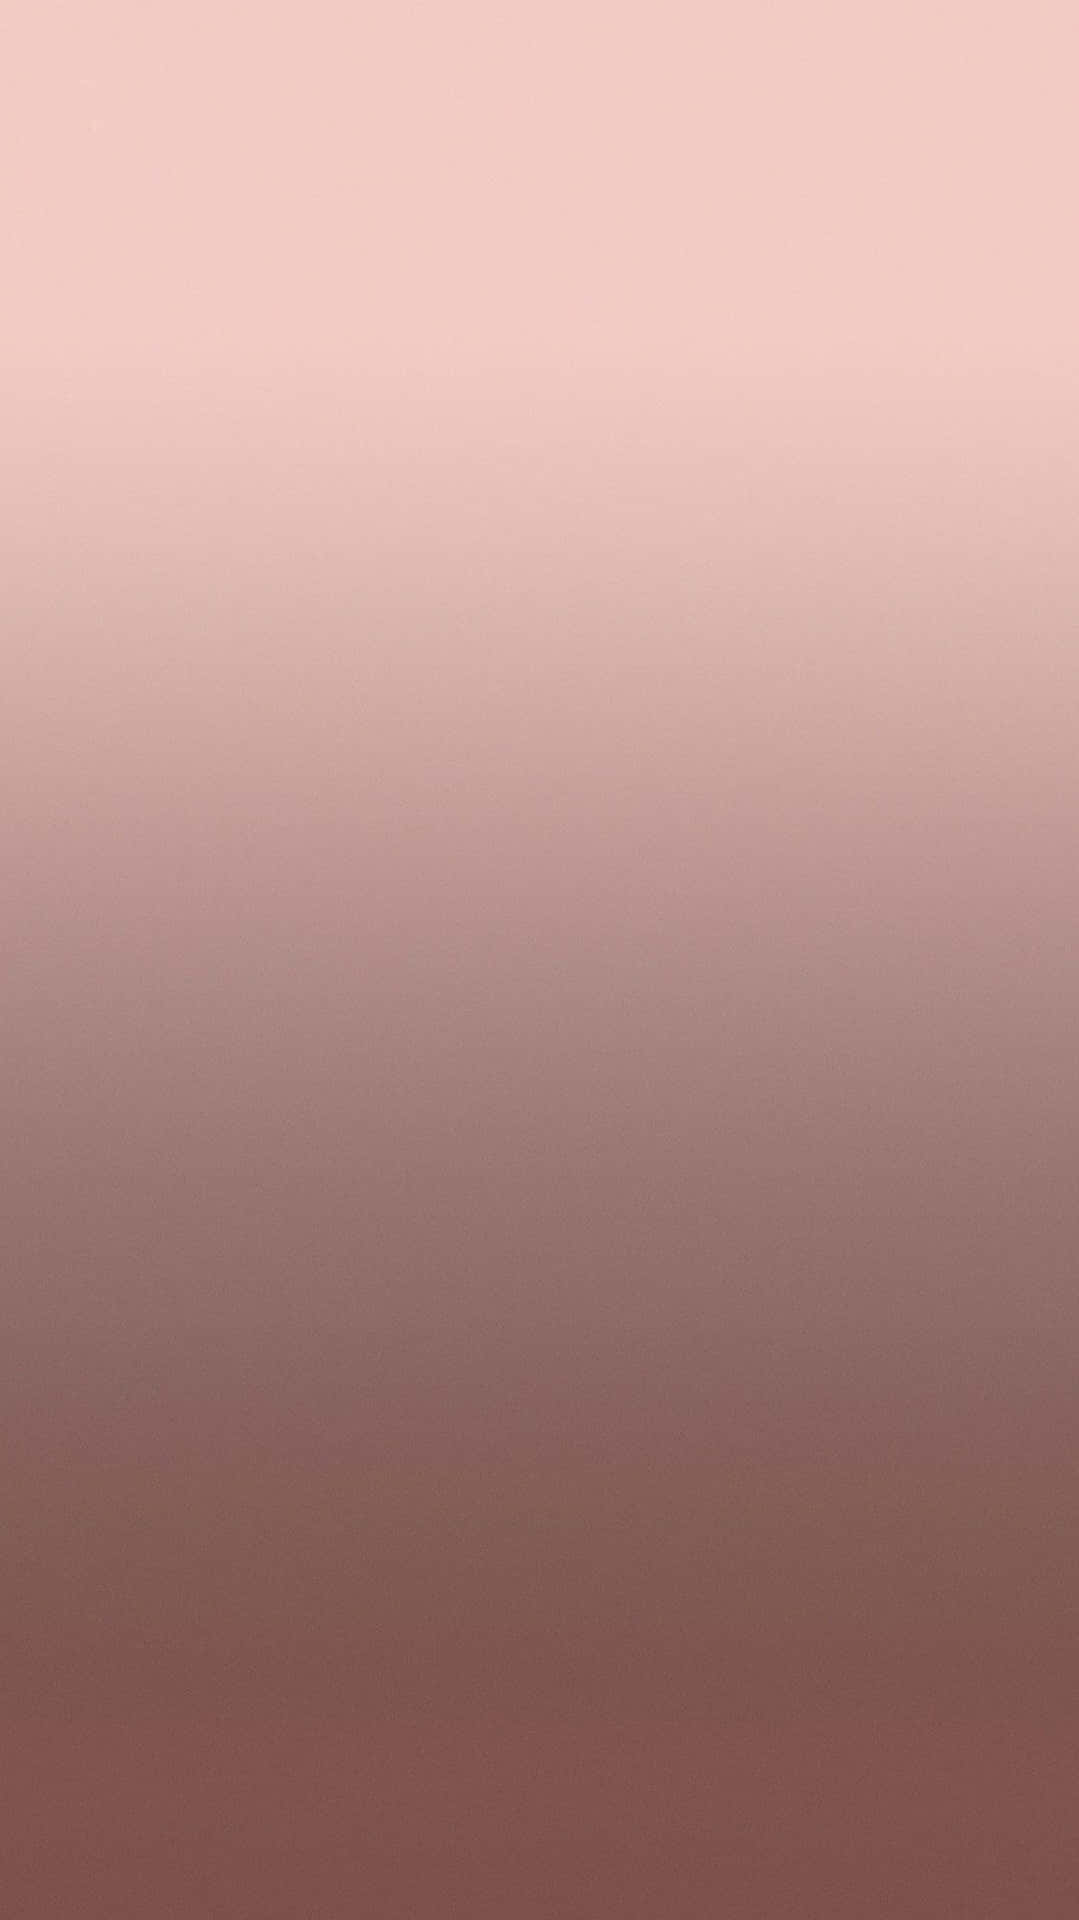 A Pink And Brown Gradient Wallpaper Wallpaper